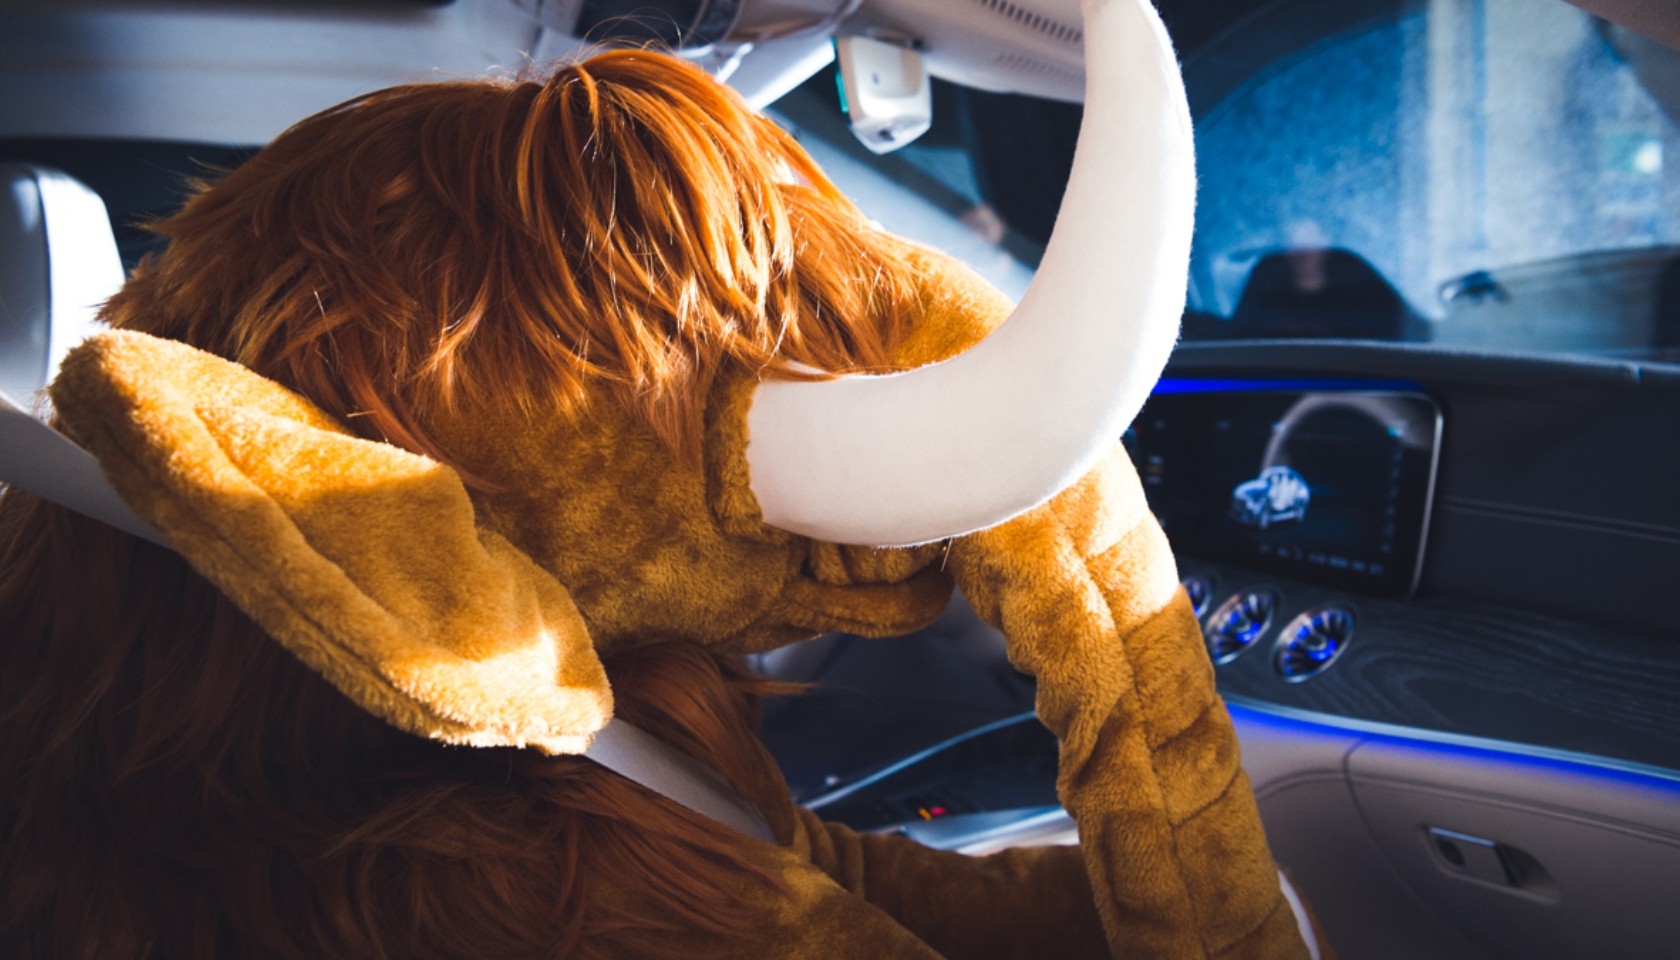 Stuffed Mammoth from Mercedes-AMG Commercial Starring Lewis Hamilton